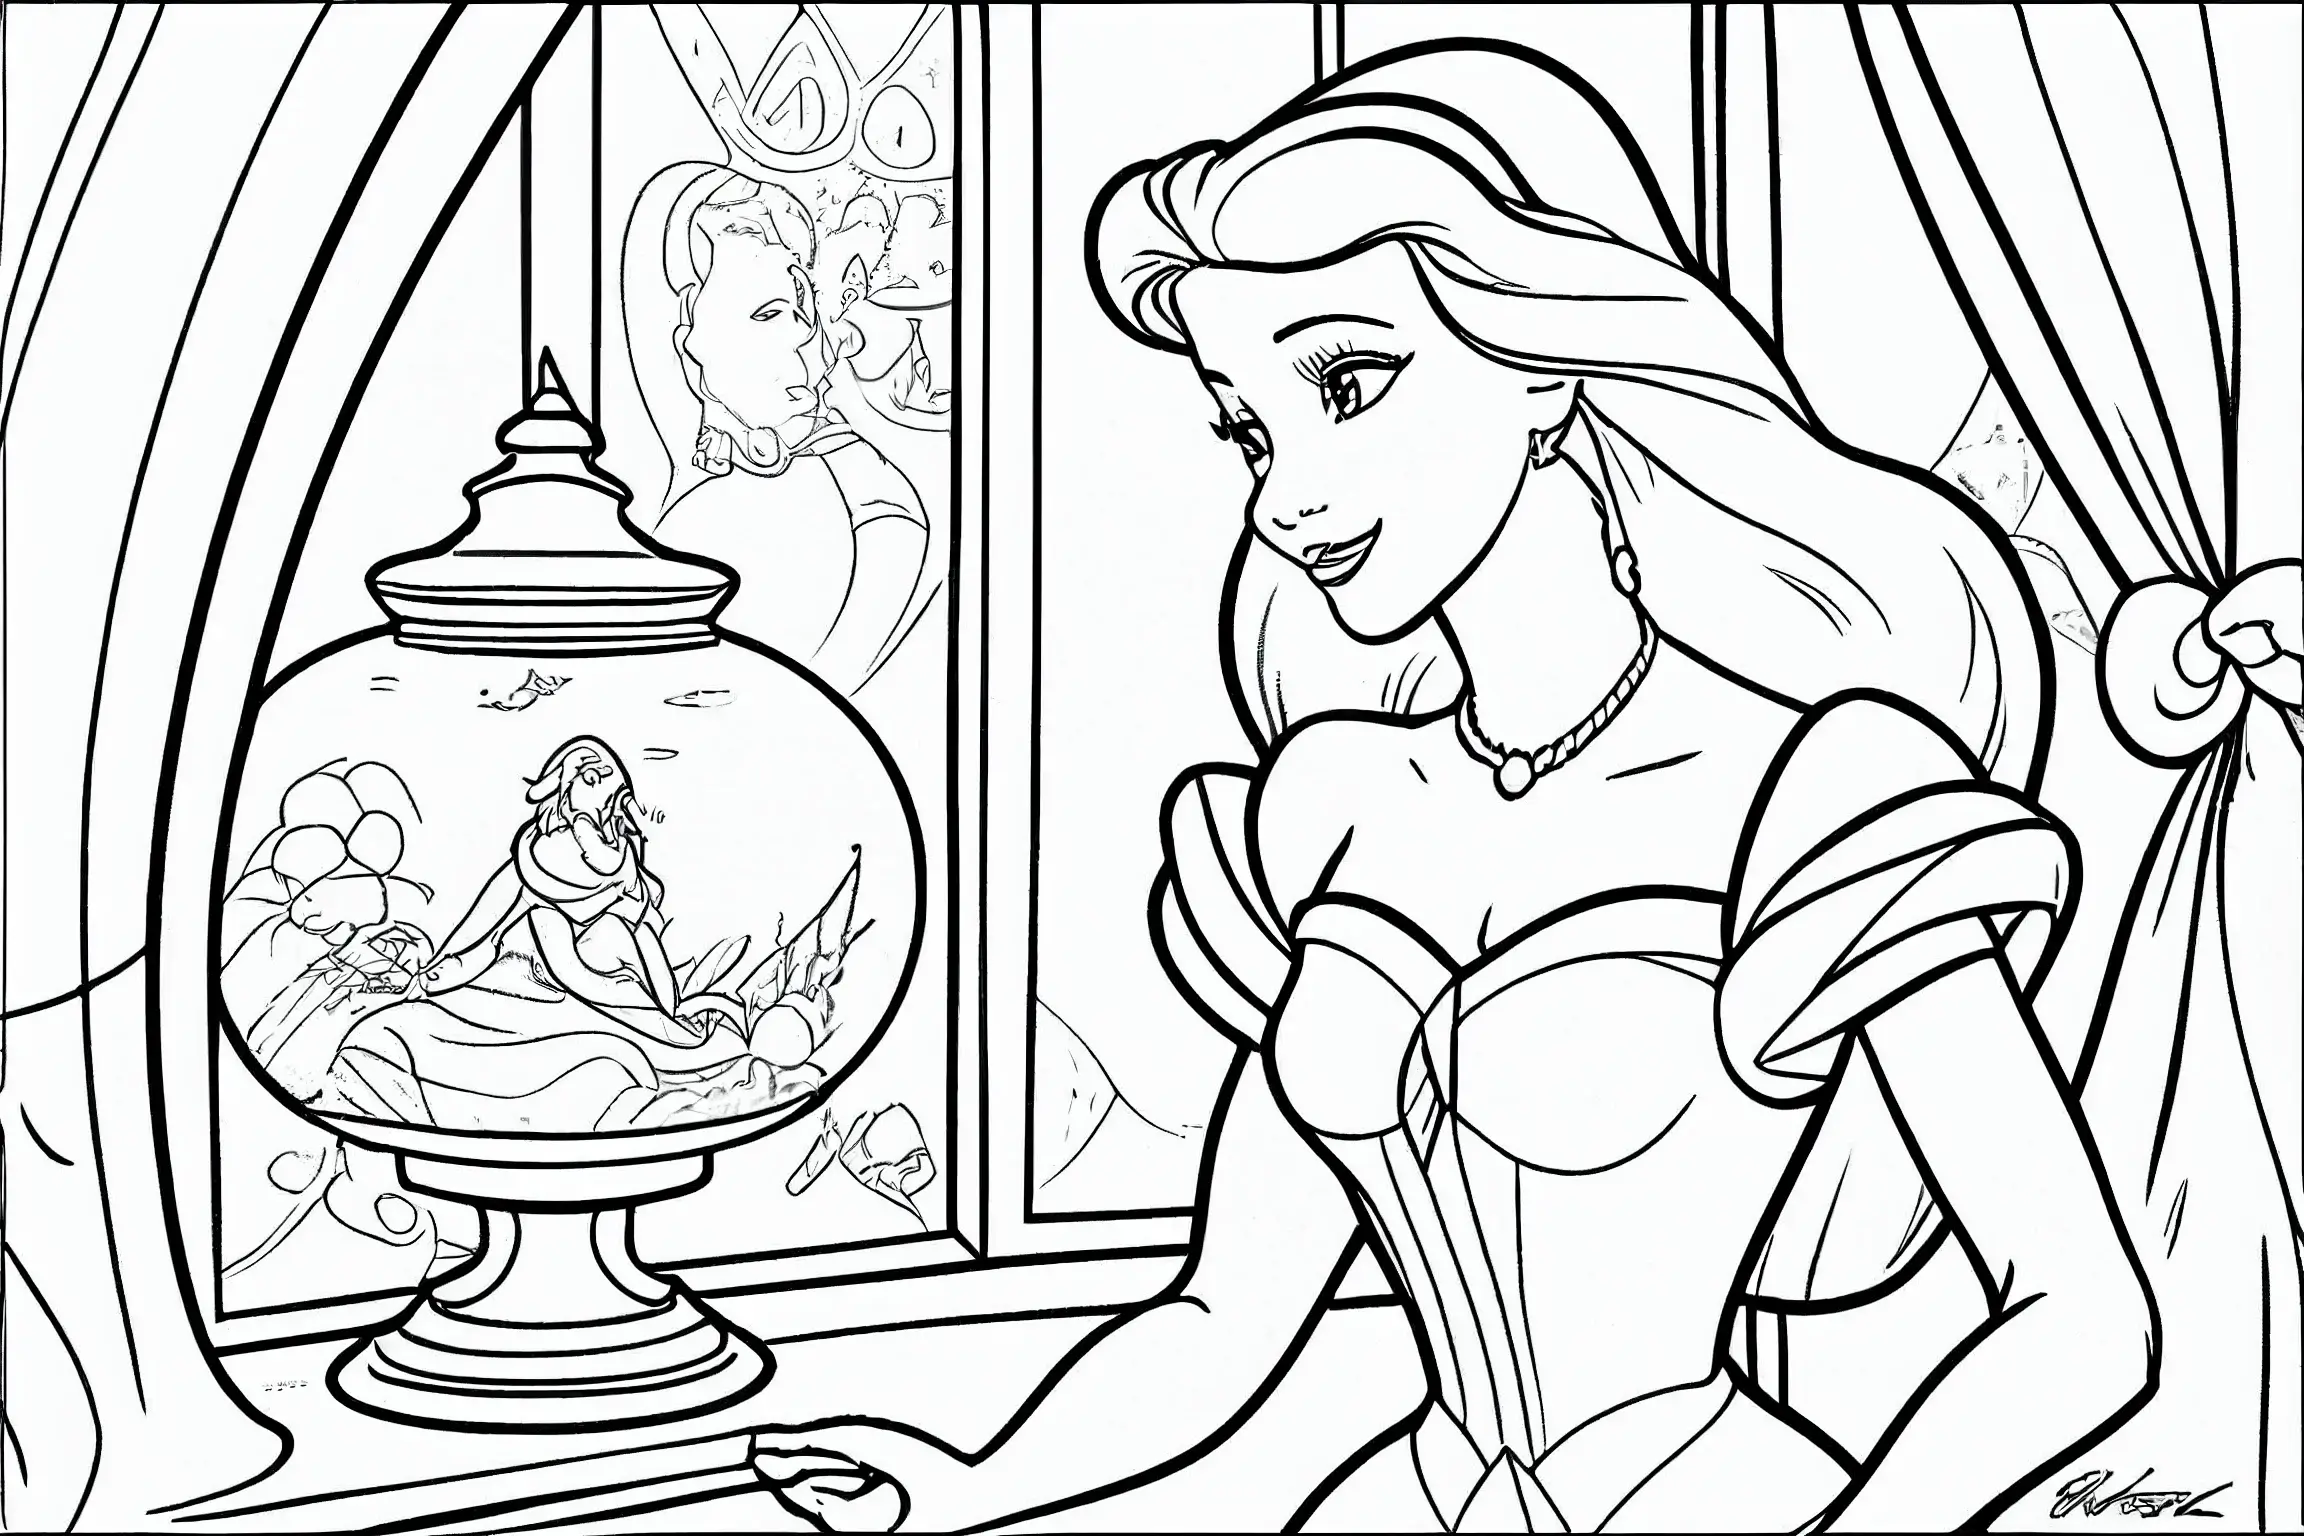 Motor Skill Development with Disney Coloring